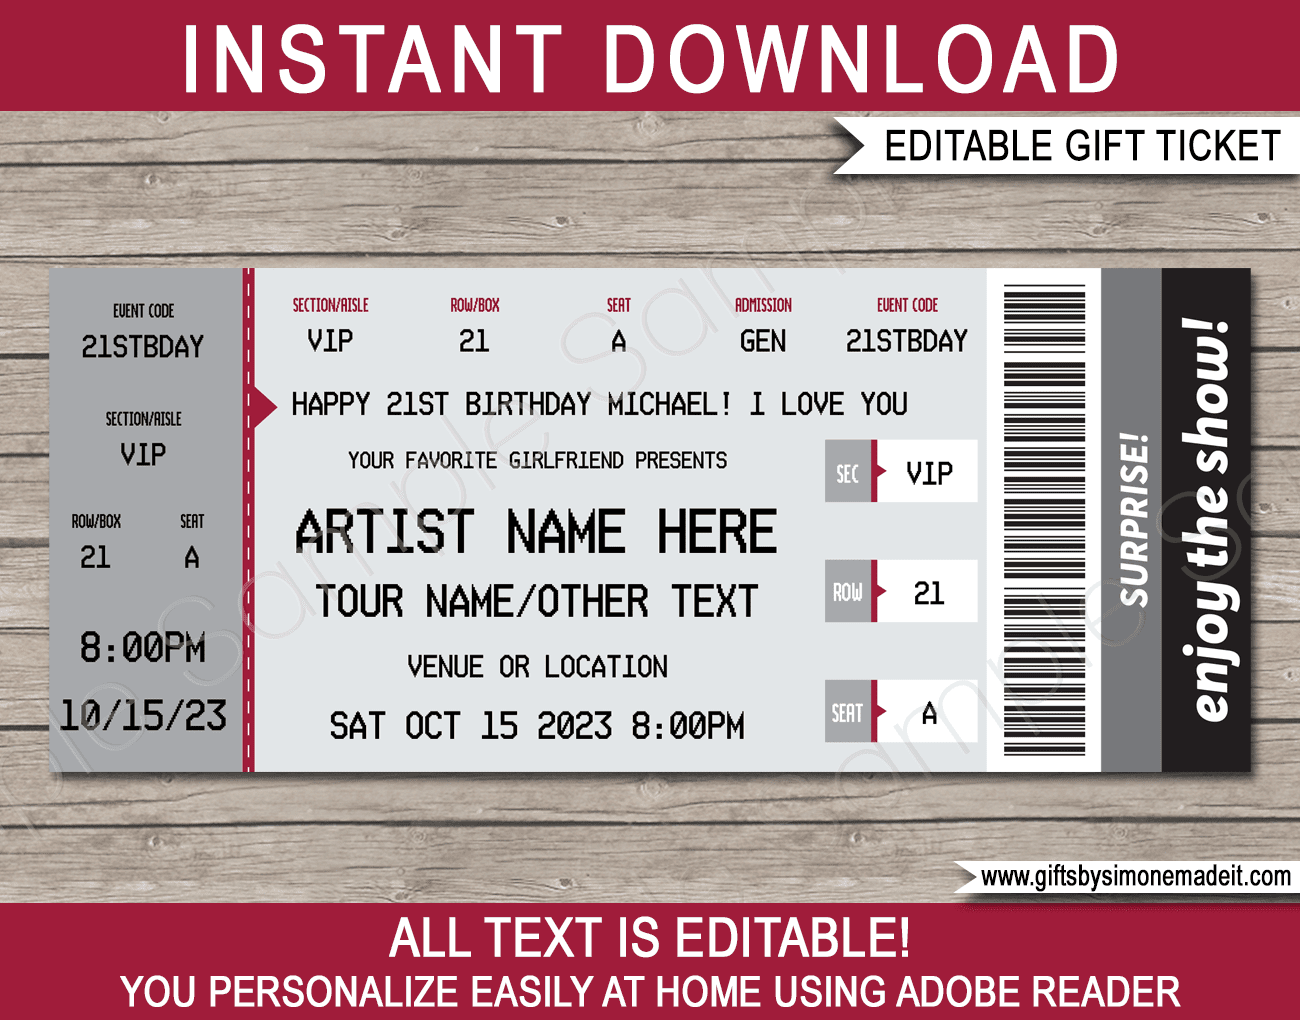 concert-ticket-template-gift-certificate-personalized-event-ubicaciondepersonas-cdmx-gob-mx